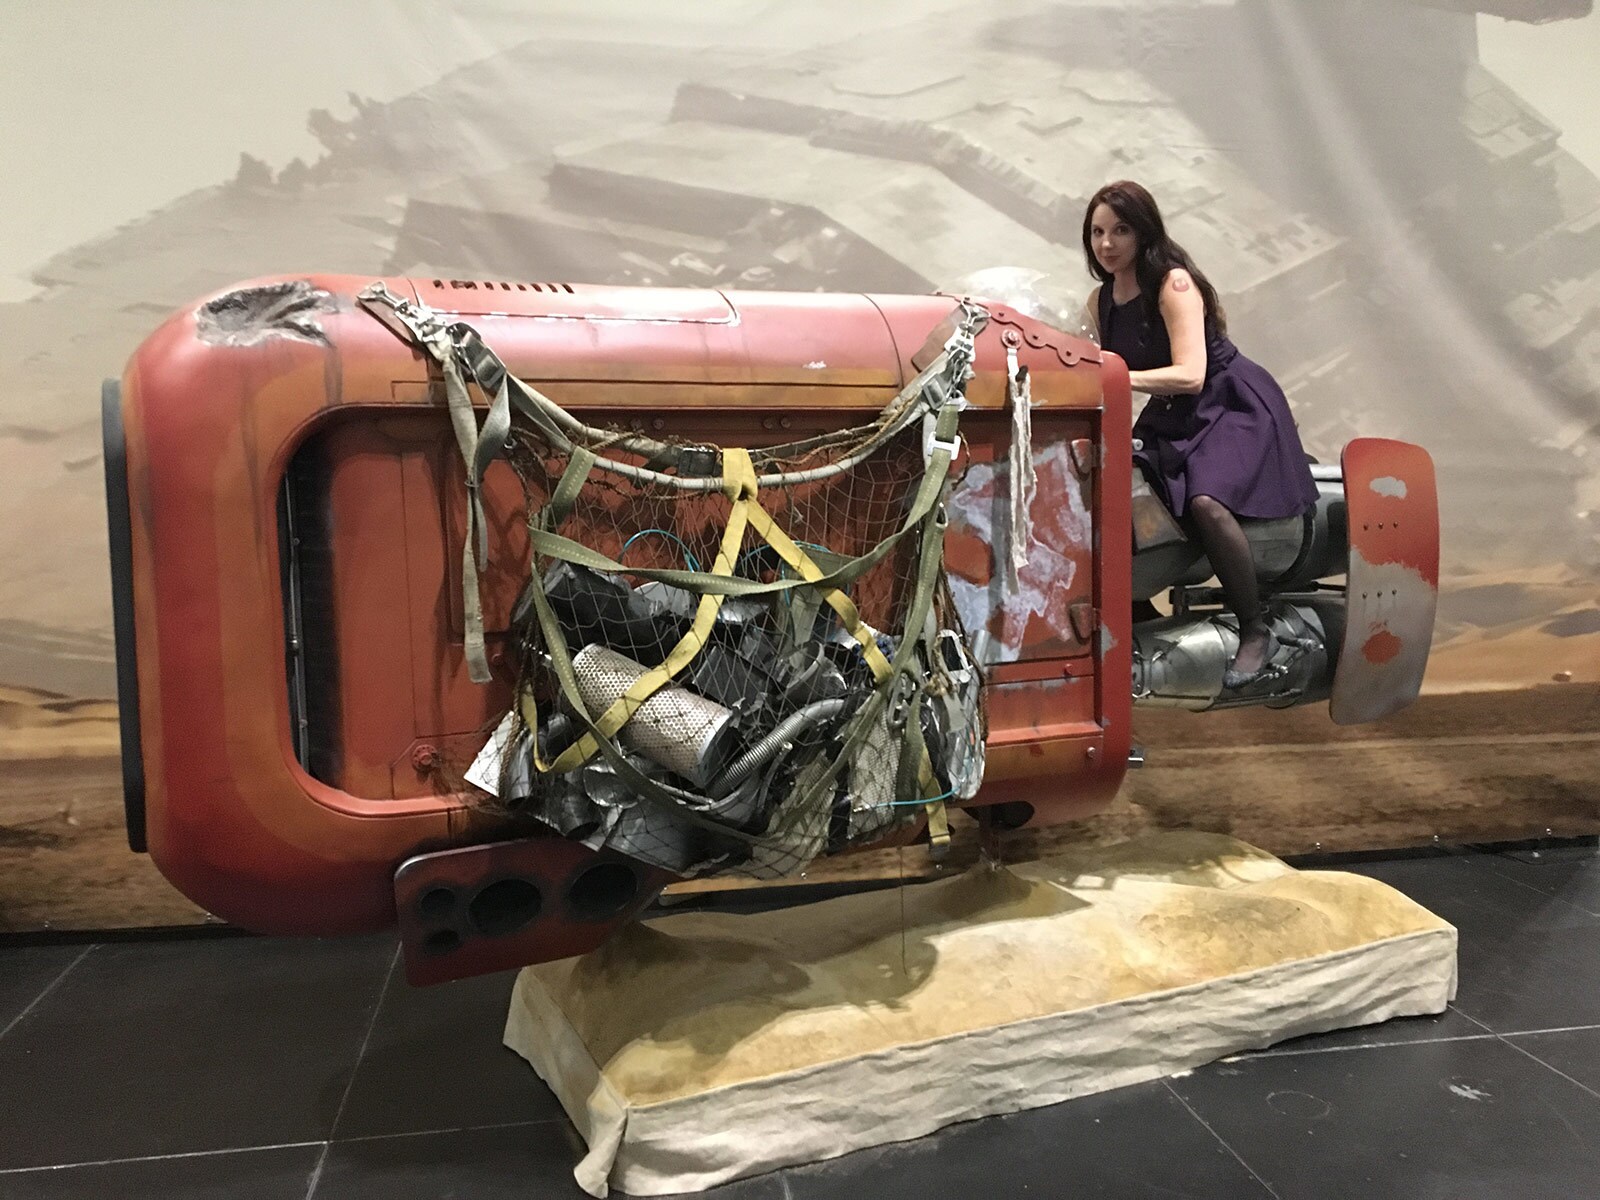 A fan poses on a model of Rey's speeder from The Force Awakens.